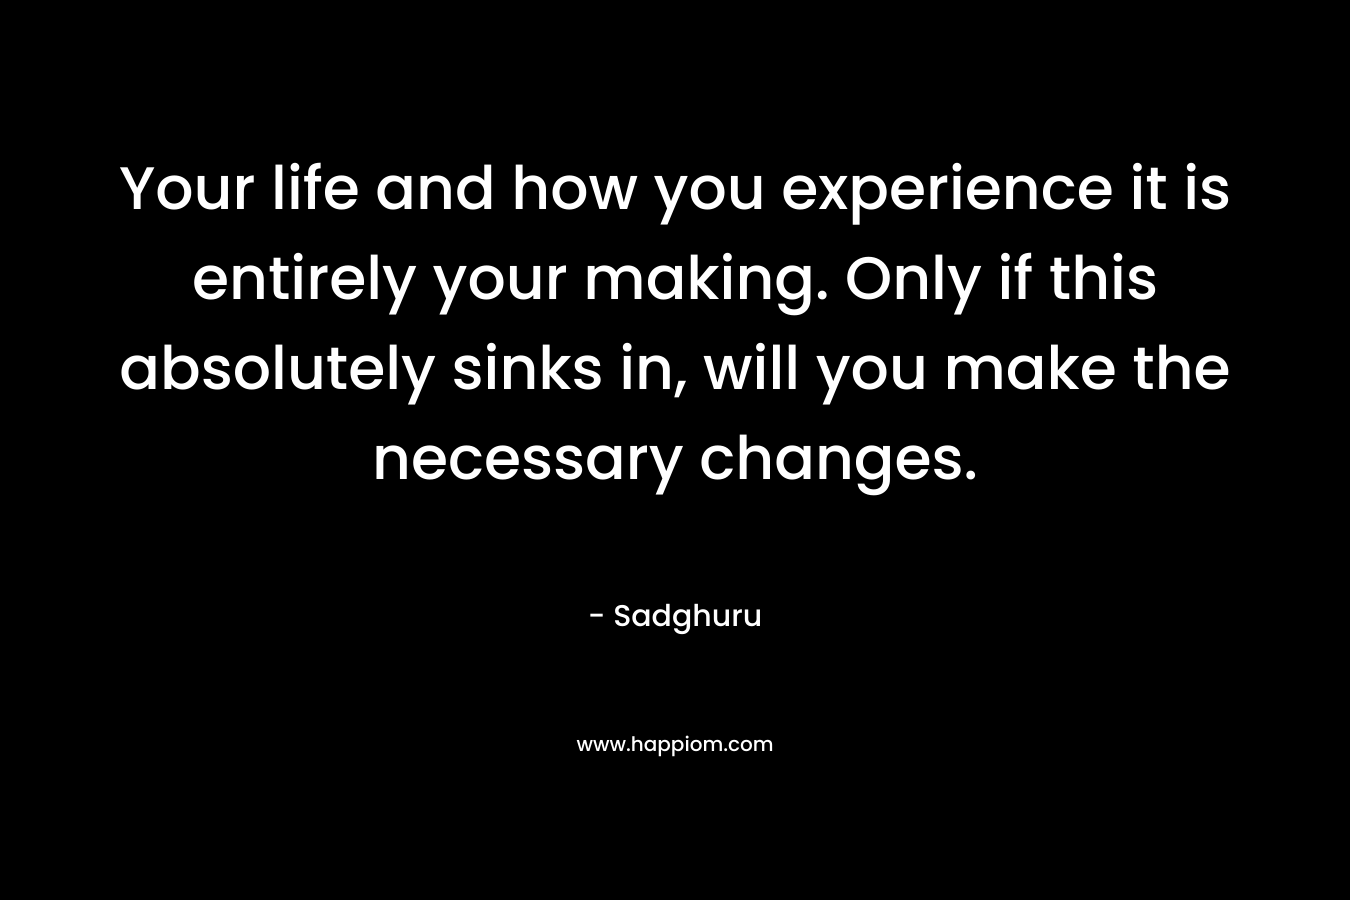 Your life and how you experience it is entirely your making. Only if this absolutely sinks in, will you make the necessary changes. – Sadghuru